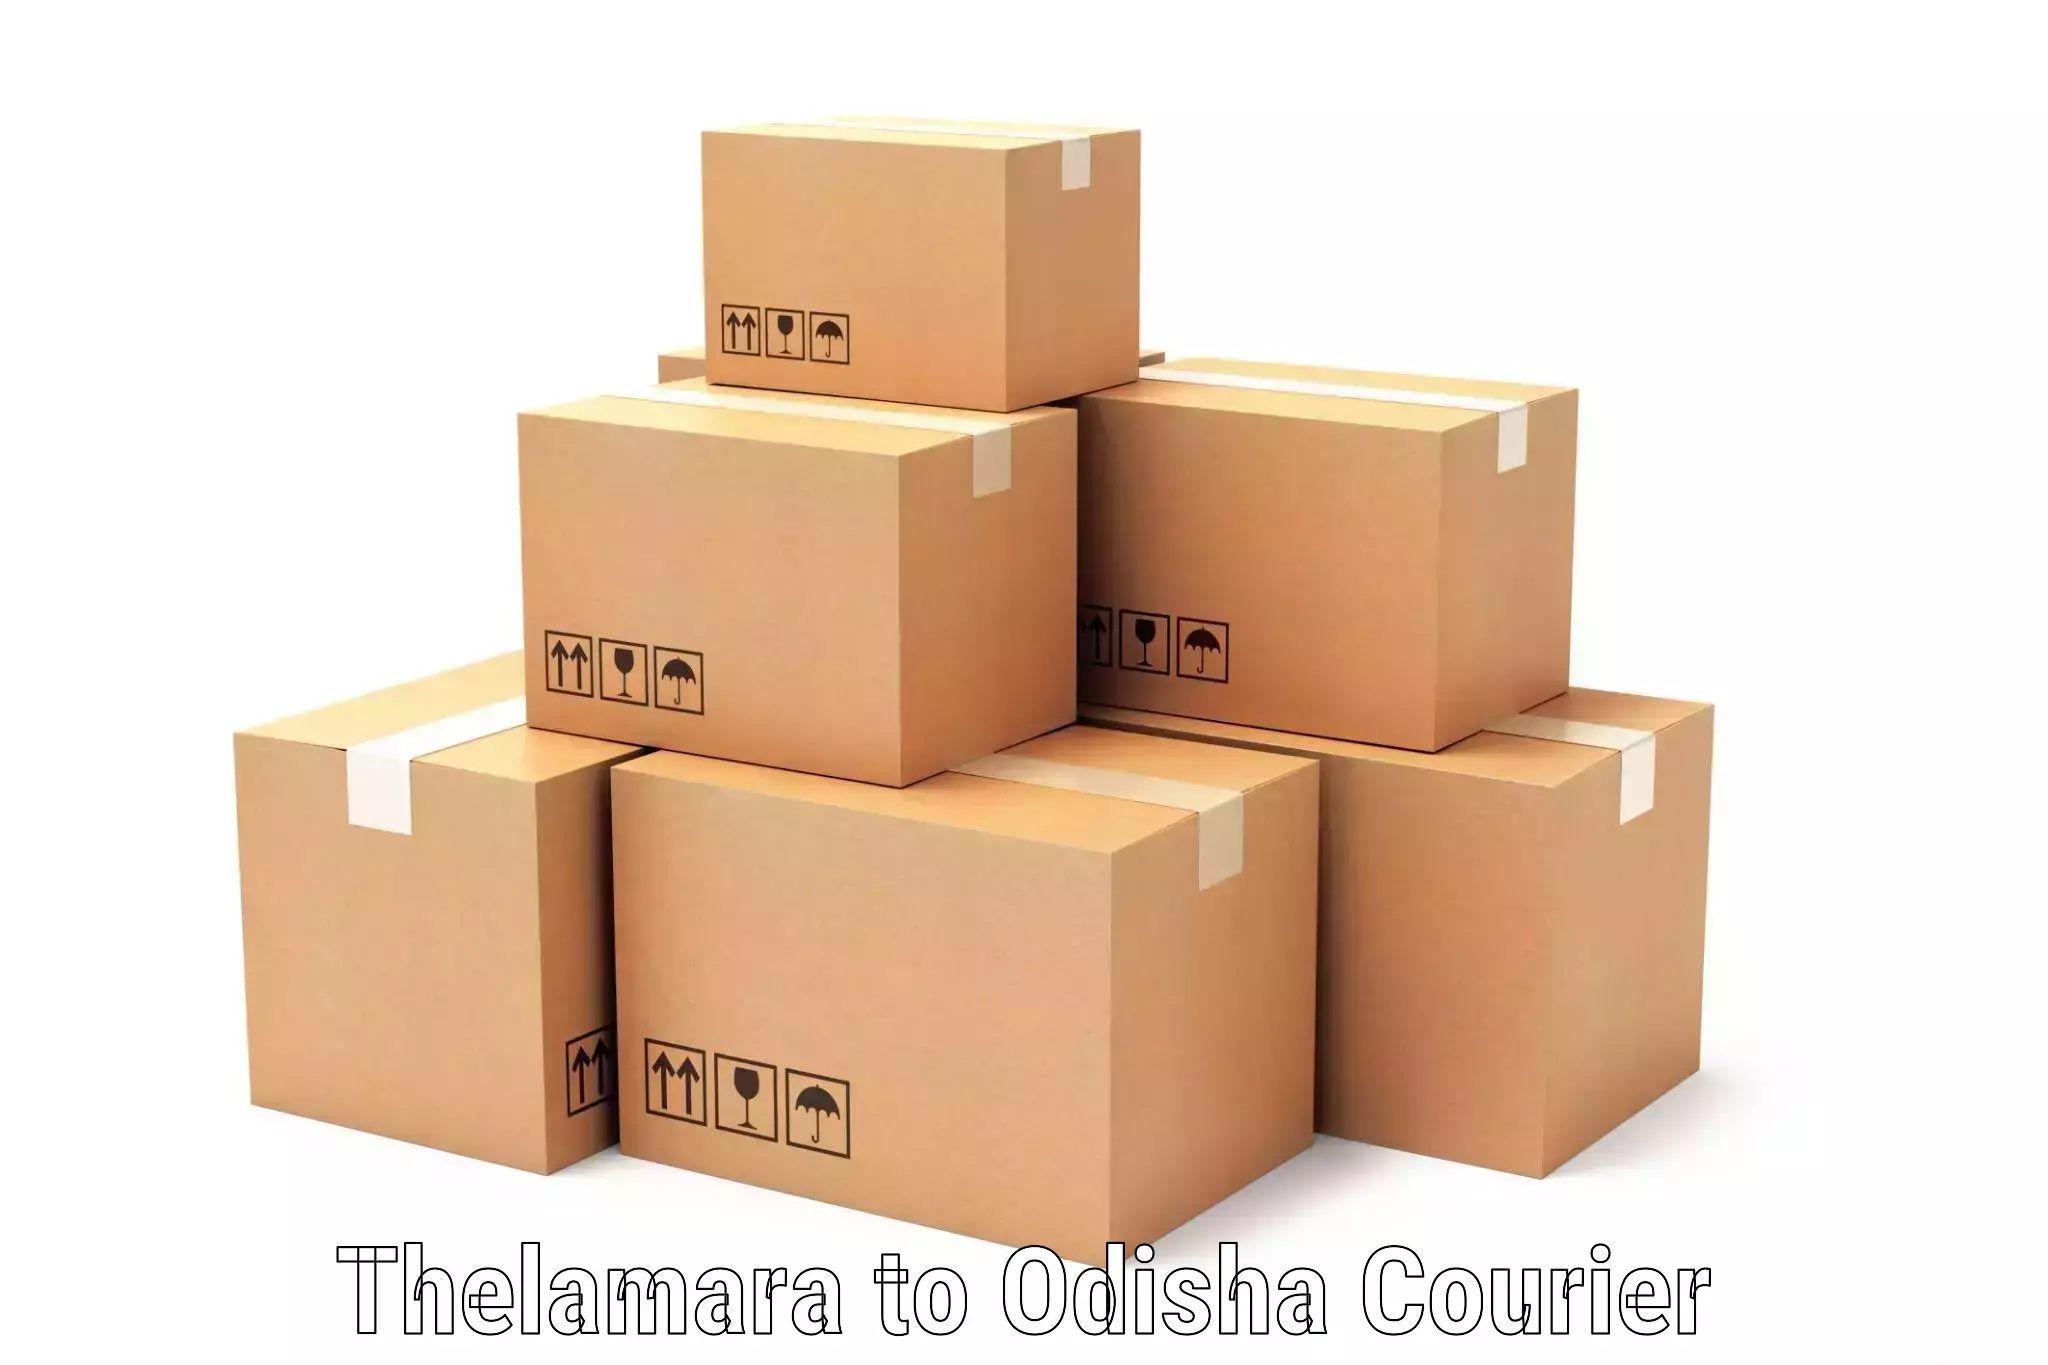 Express delivery network Thelamara to Cuttack